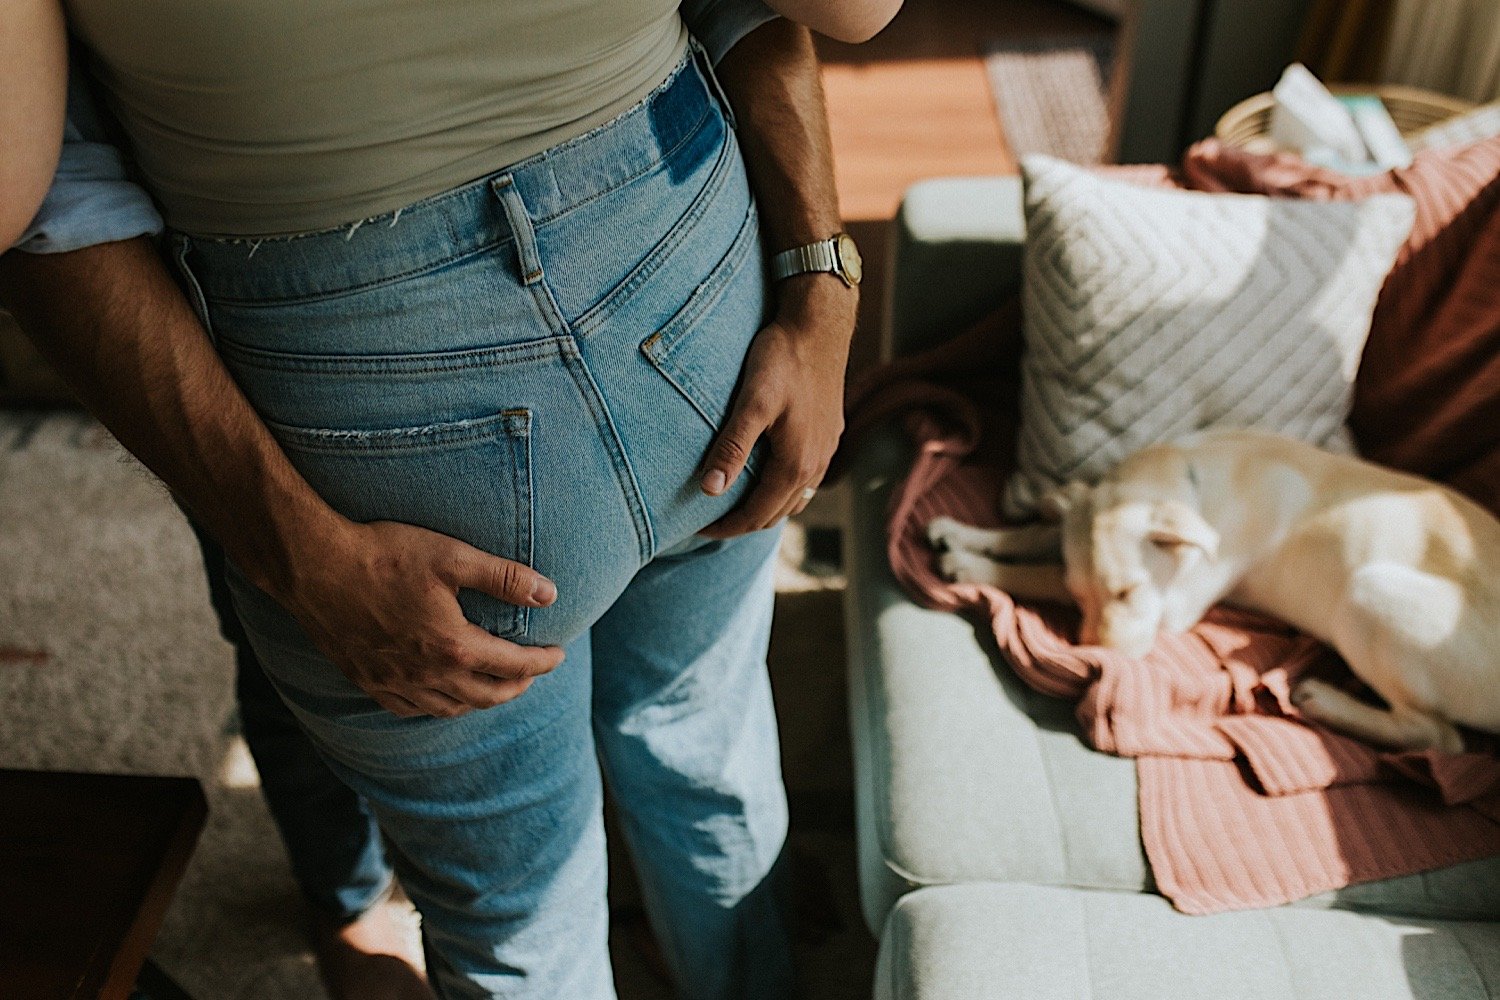 A close up image of a husband and wife hugging tight, the husband grabs his wife over her back denim pockets.  There is a pup sleeping on the couch in the background.